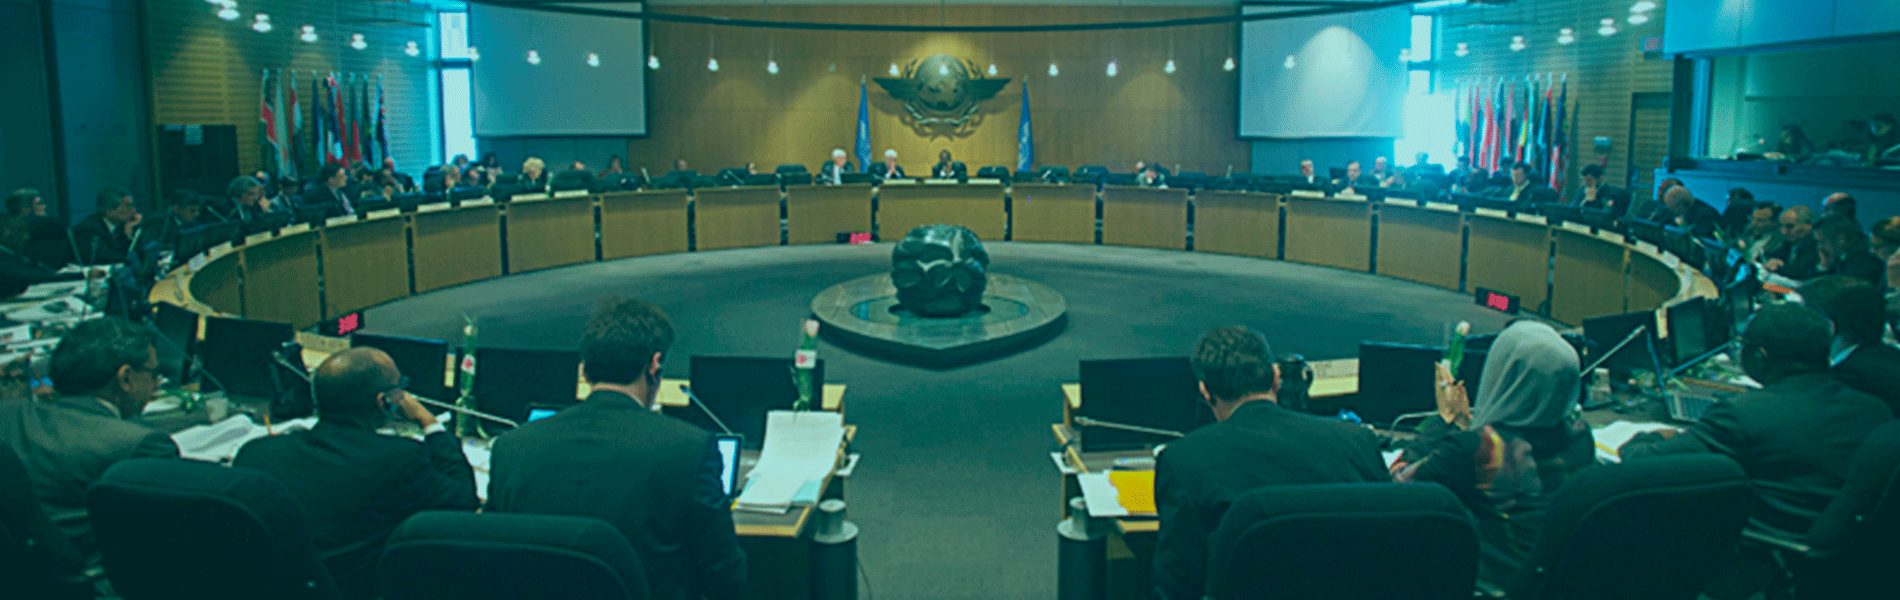 ACVFFI is recognized by ICAO